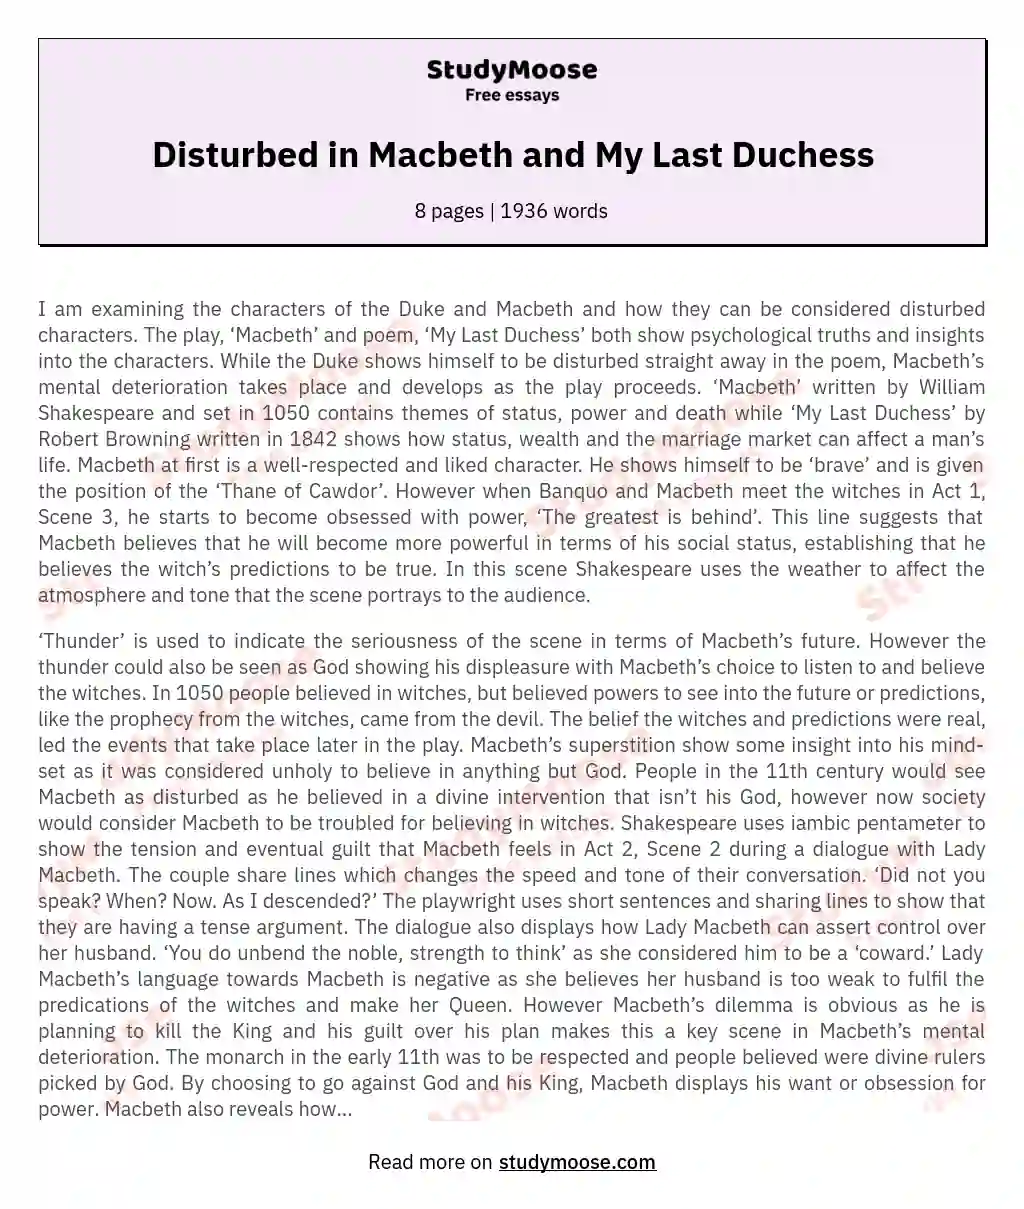 How the Characters of Macbeth and the Duke in My Last Duchess Can Be Considered to Be Disturbed Characters?